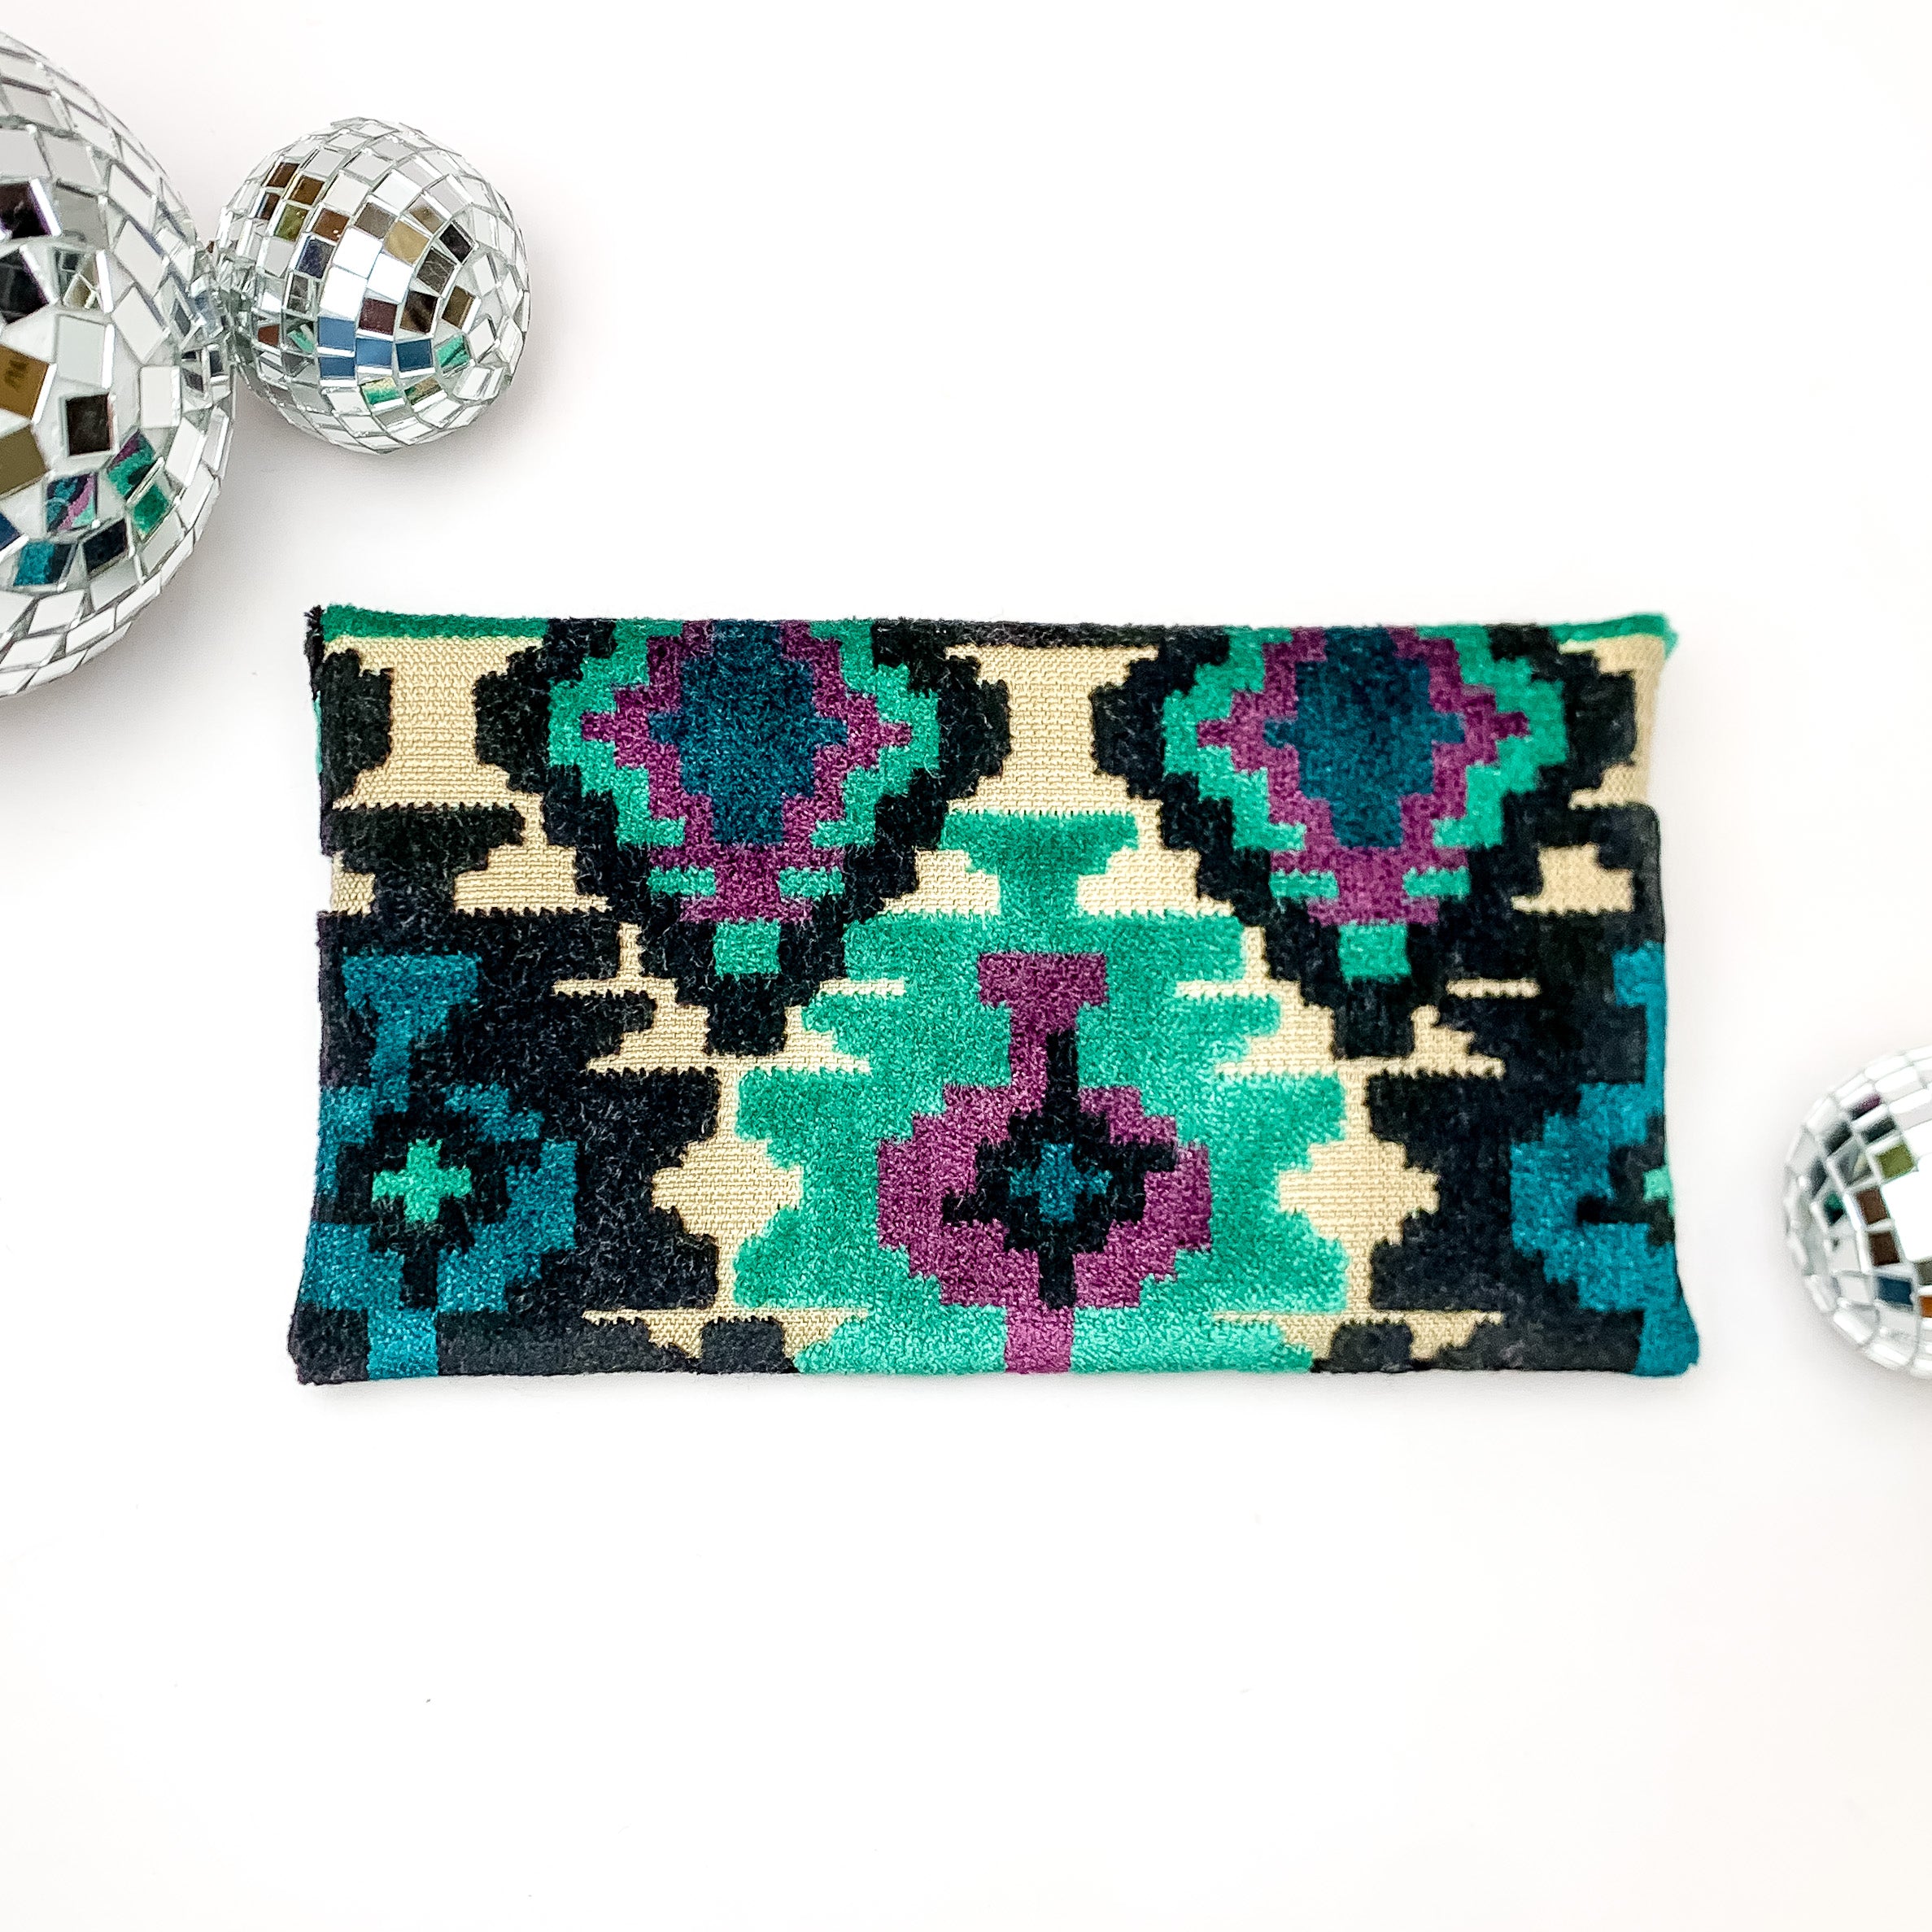 Makeup Junkie | Mini Midnight Aztec Lay Flat Bag in Turquoise Green and Black Mix - Giddy Up Glamour Boutique